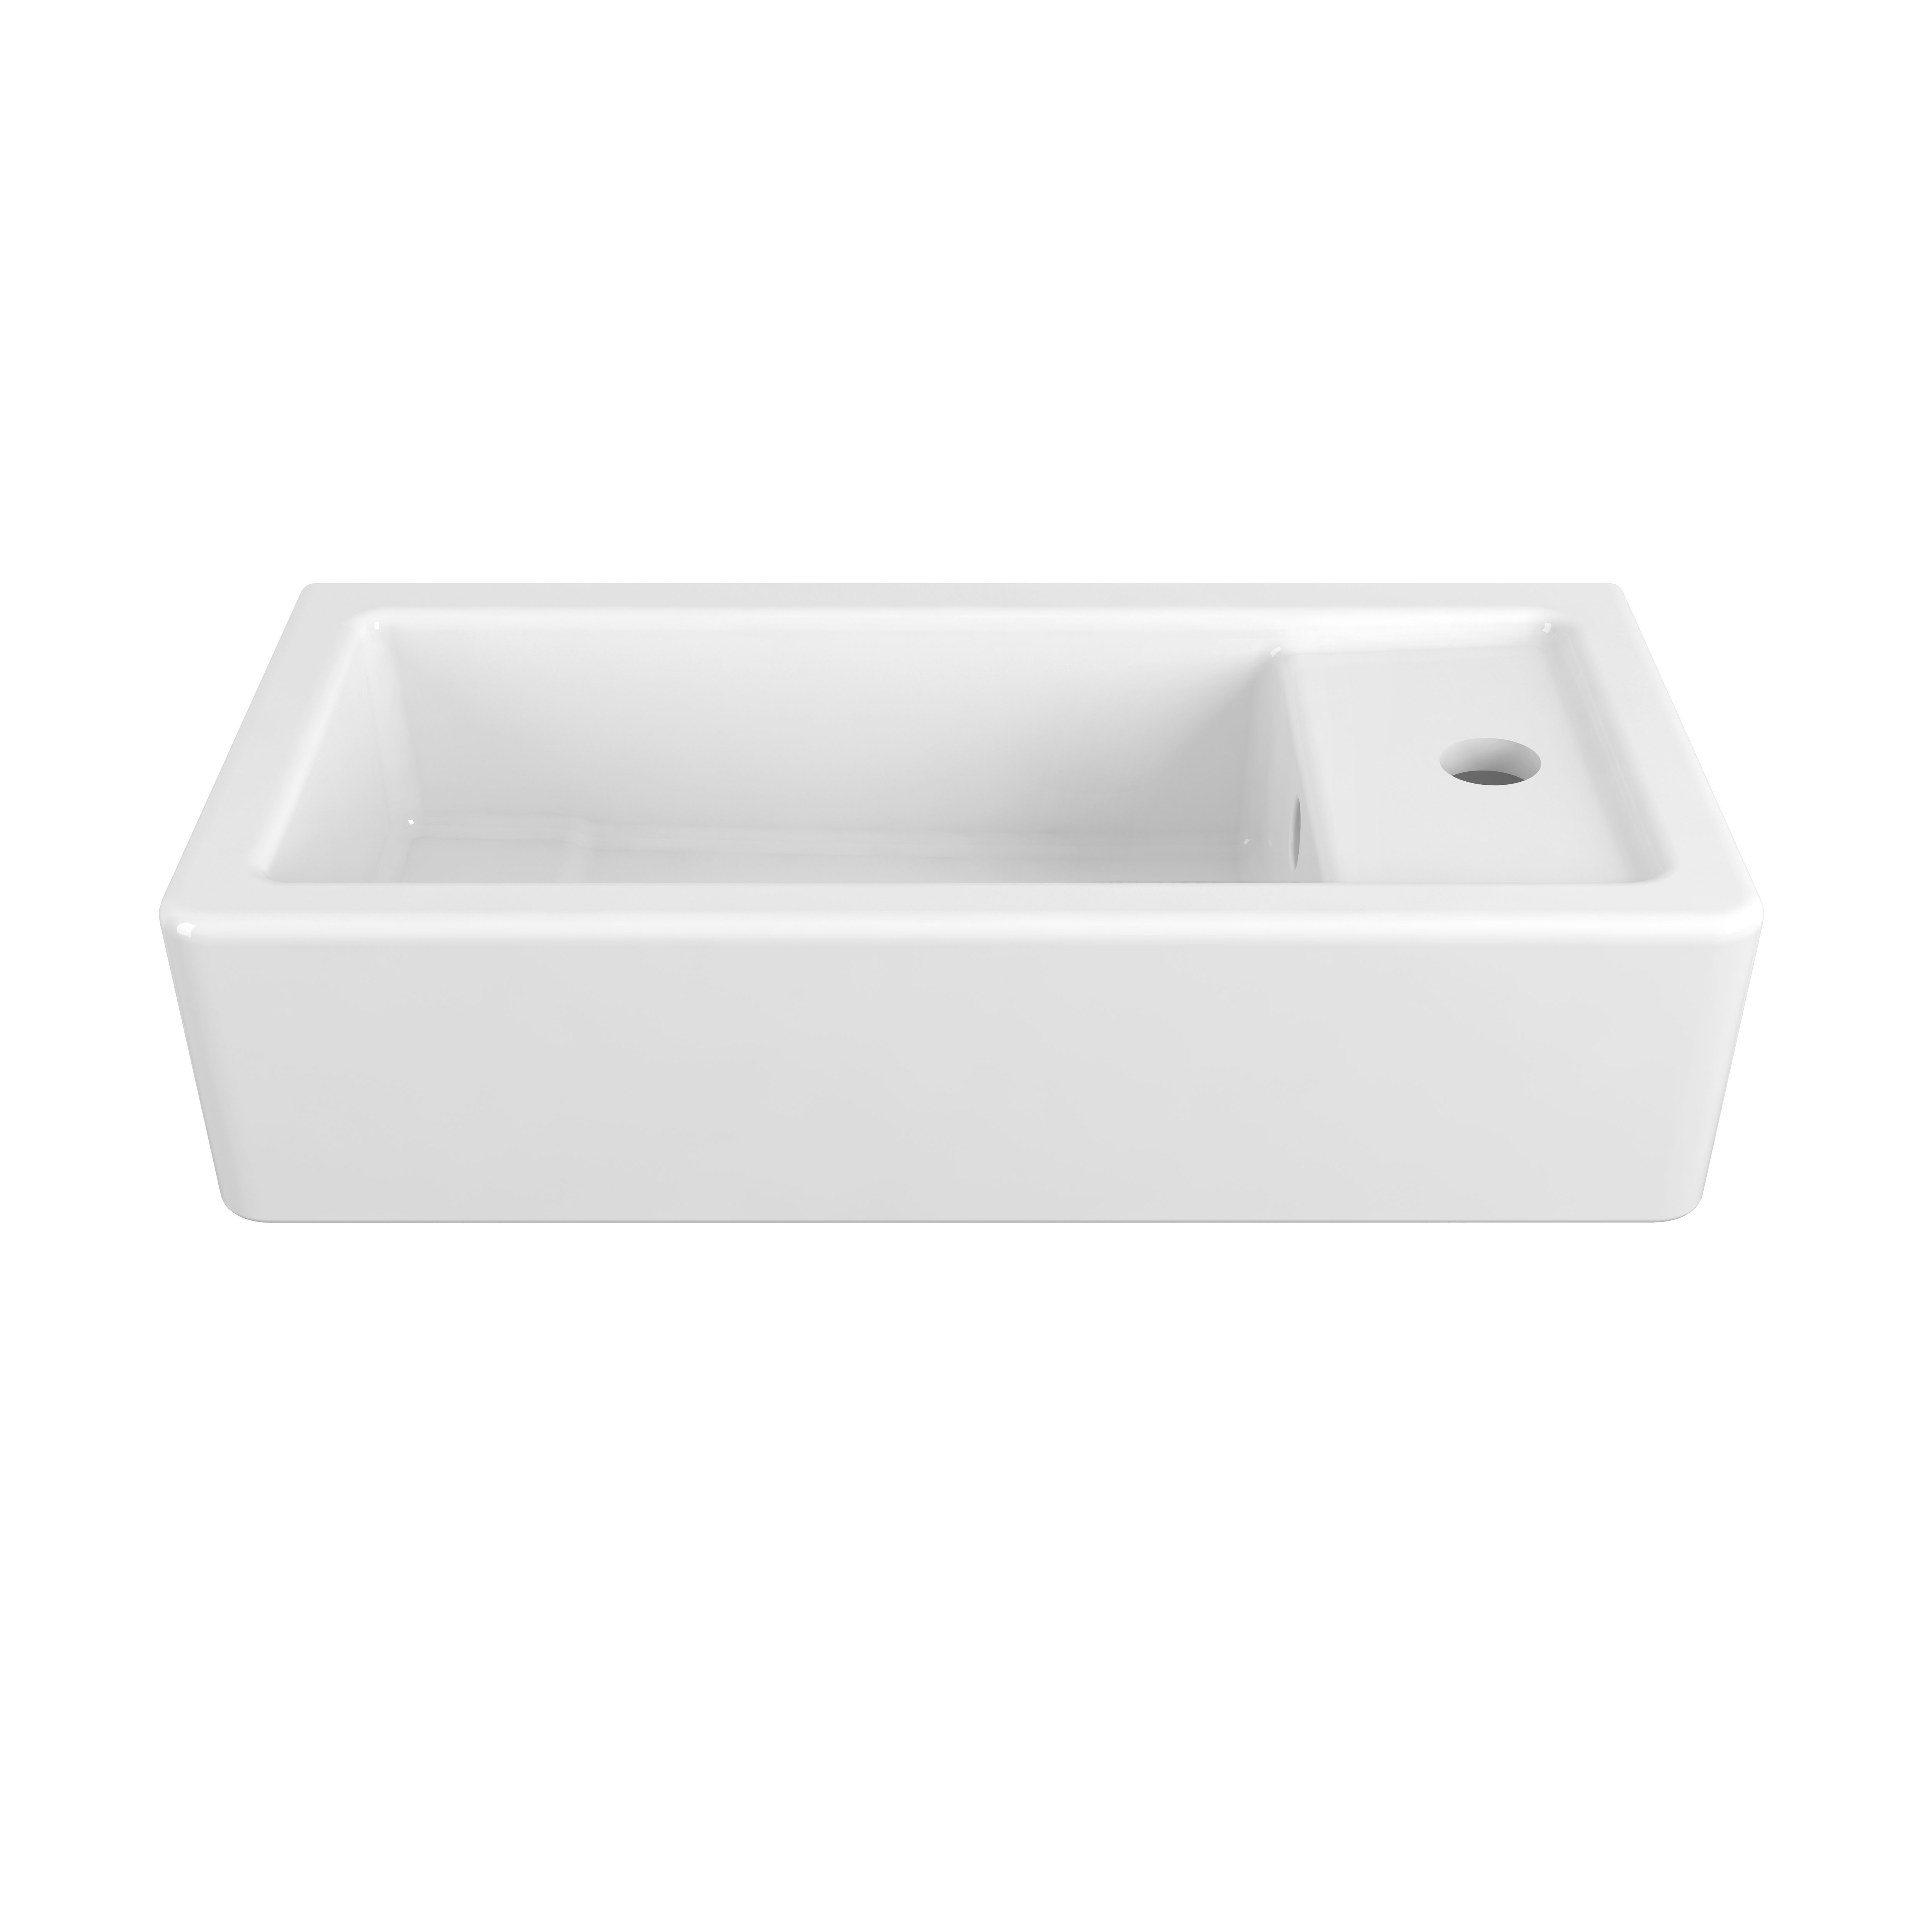 Cossu 20 in. Wall Hung Bathroom Sink, Single Hole with Right Hand Drain